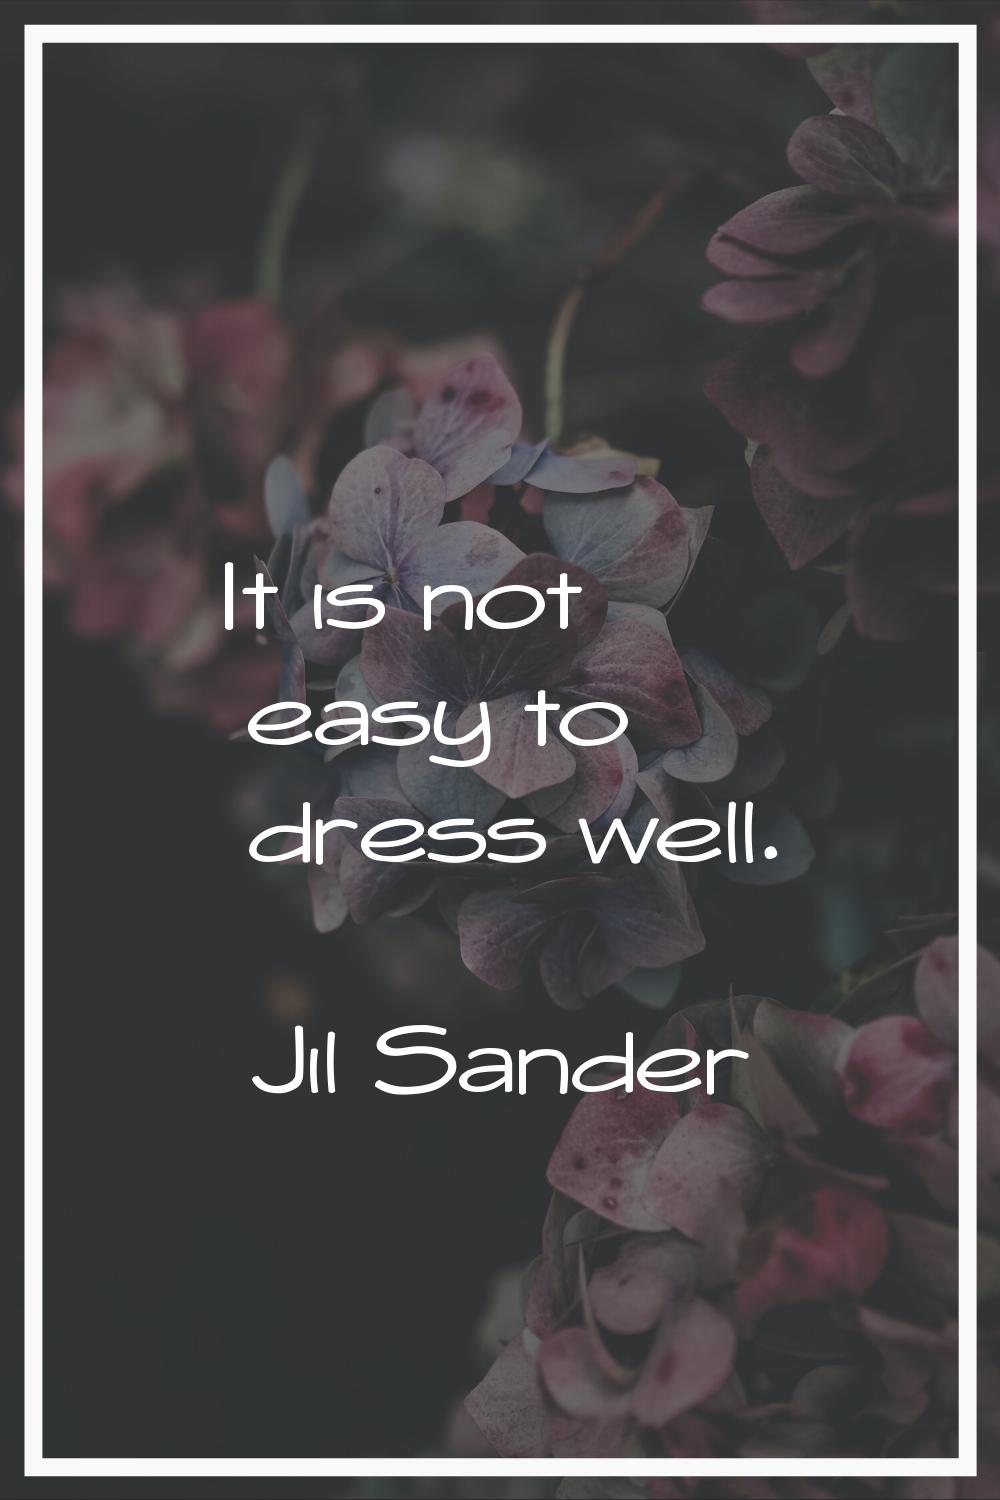 It is not easy to dress well.